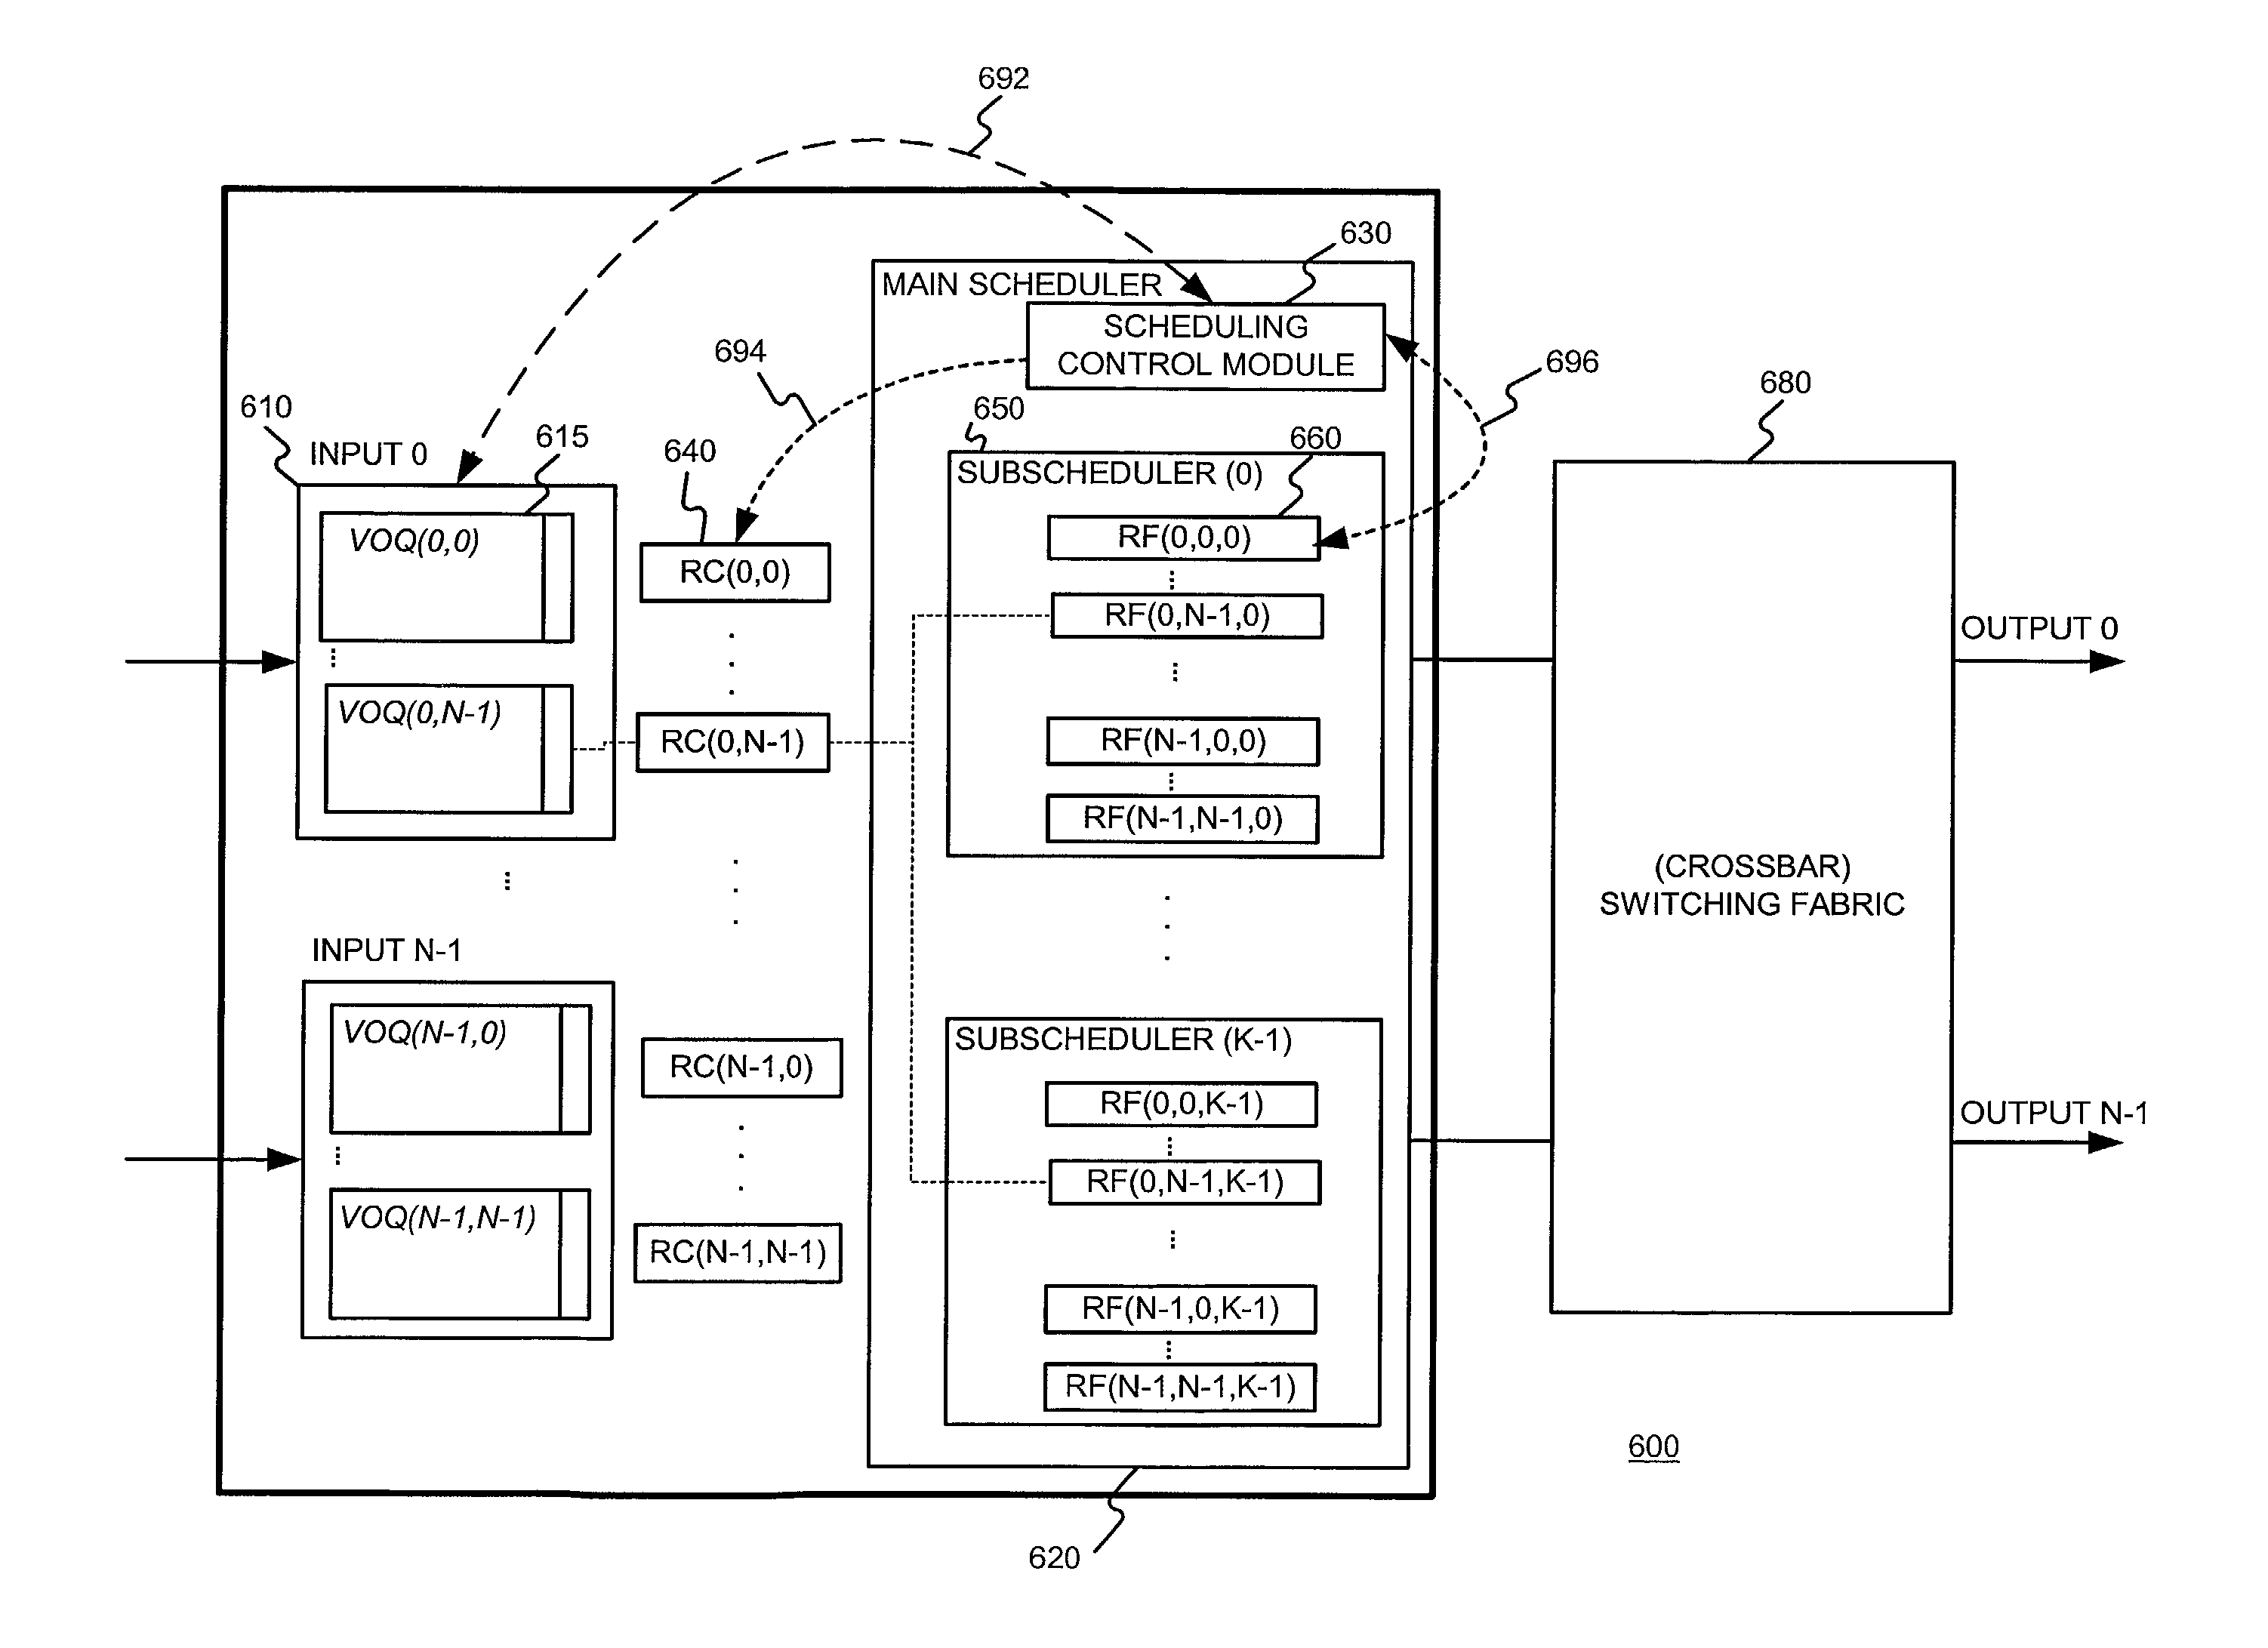 Pipelined maximal-sized matching cell dispatch scheduling